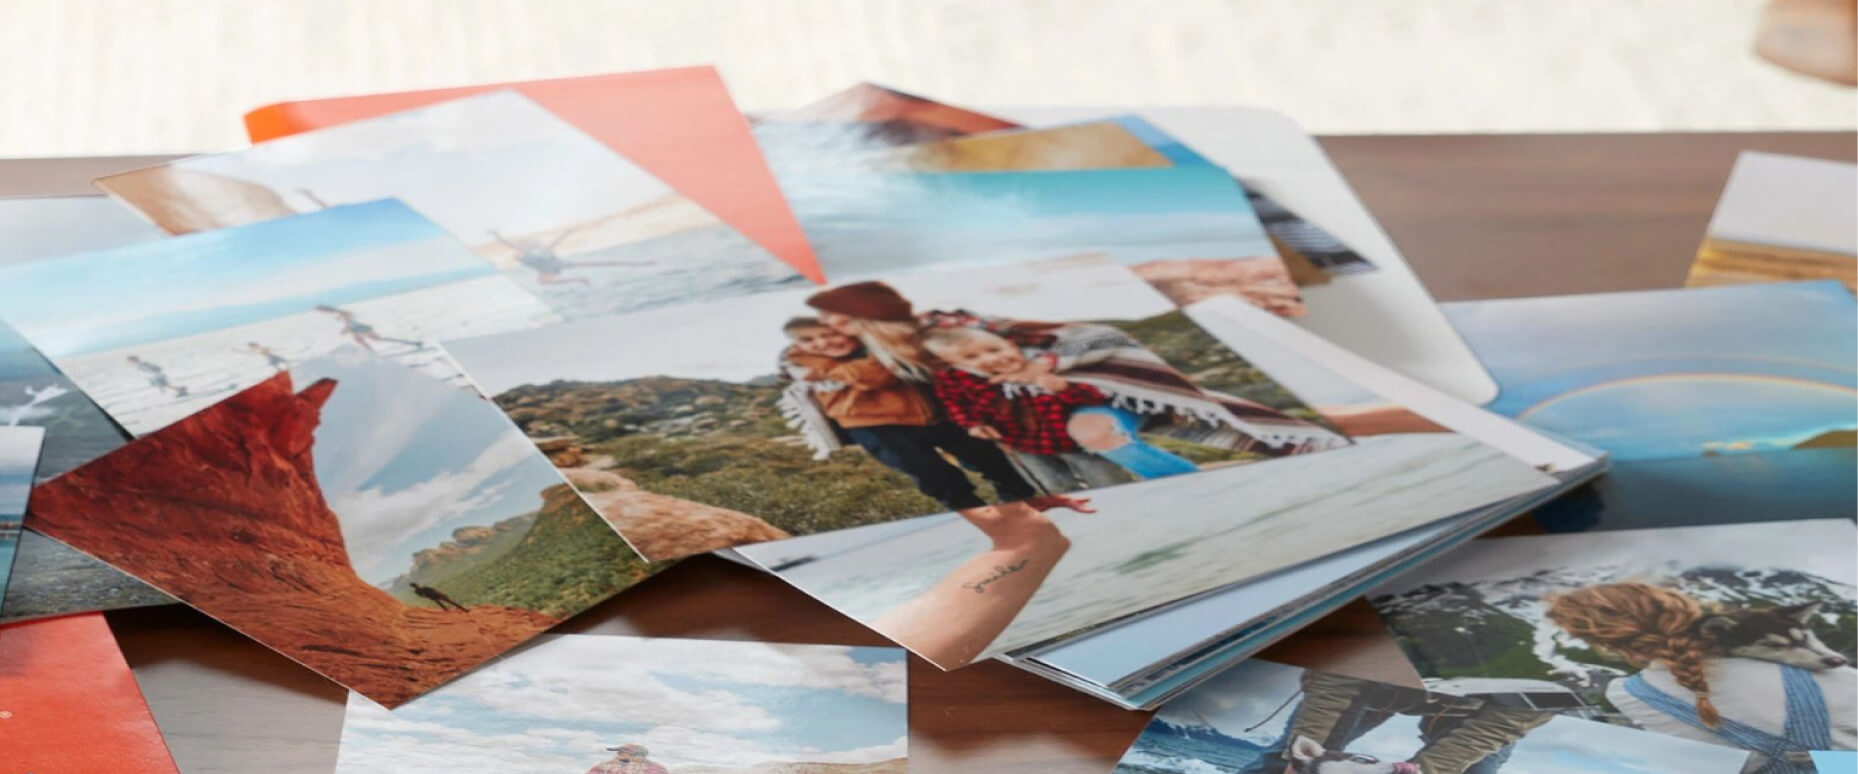 Shutterfly: Photo Books, Cards, Prints, Wall Art, Gifts, Wedding